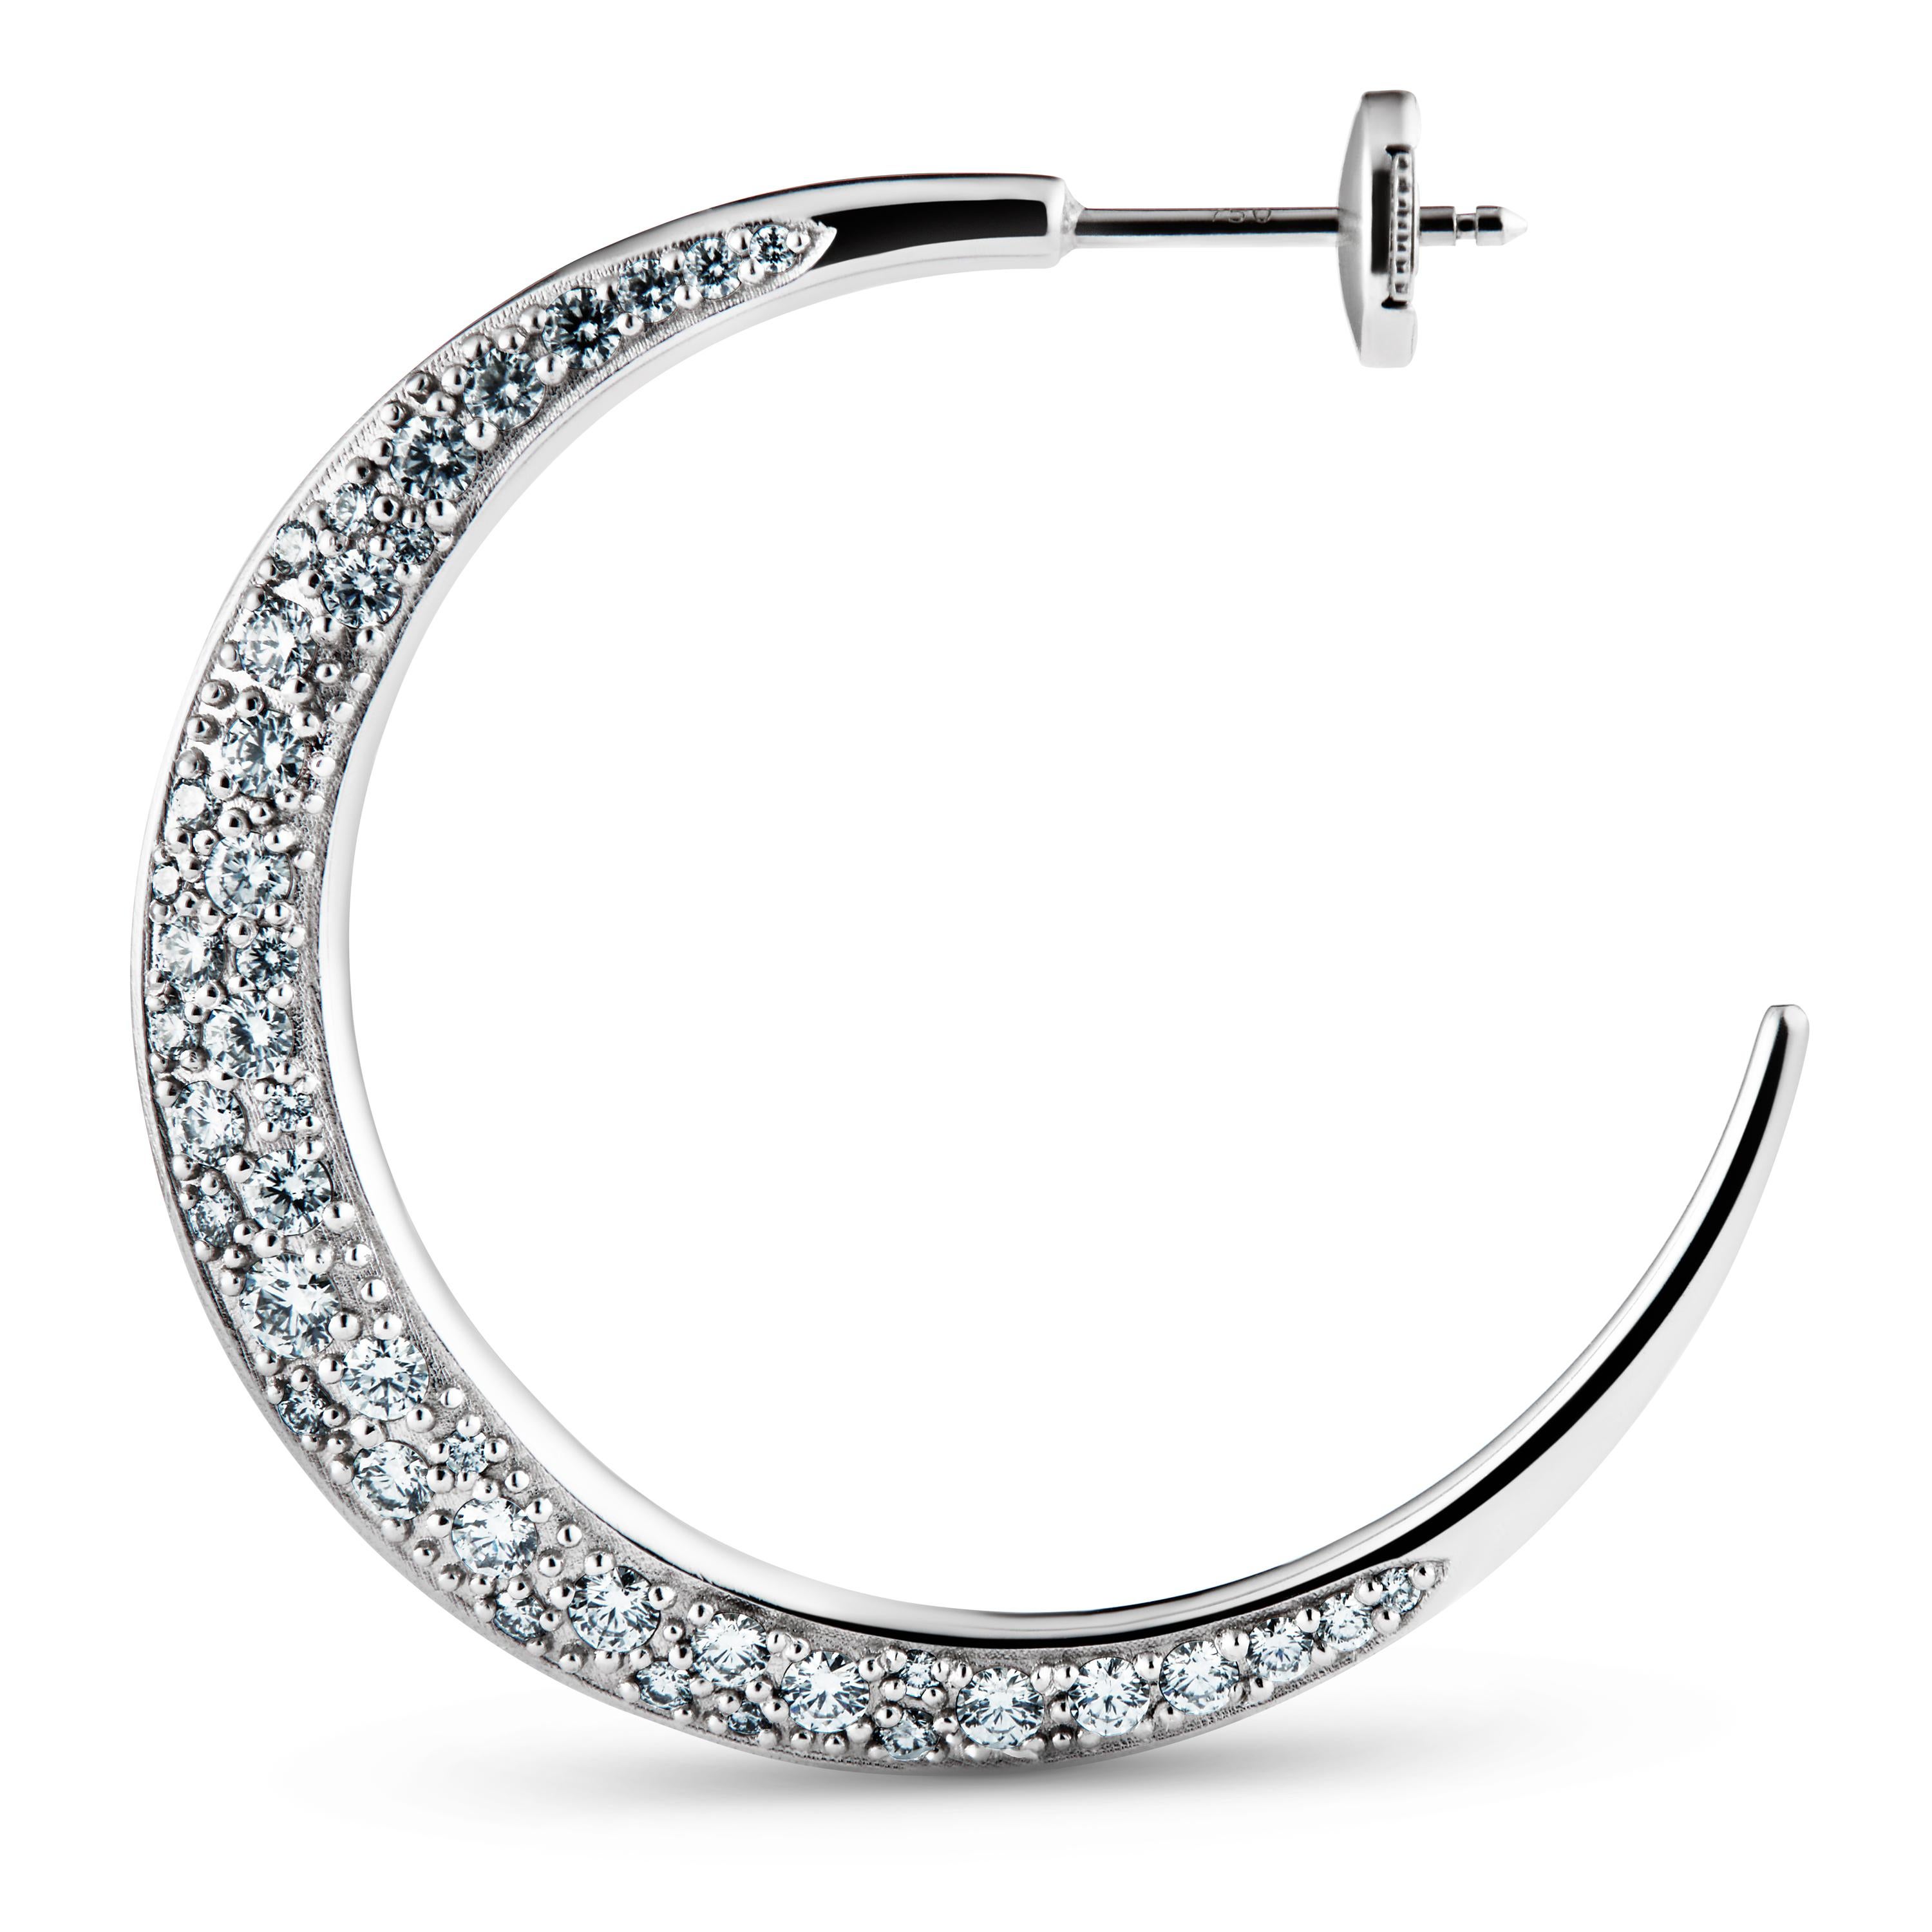 The XL Diamond Hoops in 18k white gold are  hand set with 84 diamonds, a total of 1.5 carat, brilliant cut traceable diamonds.

Each of the 84 diamonds are hand set so they underline the shape of the earring providing the perfect sparkle and light